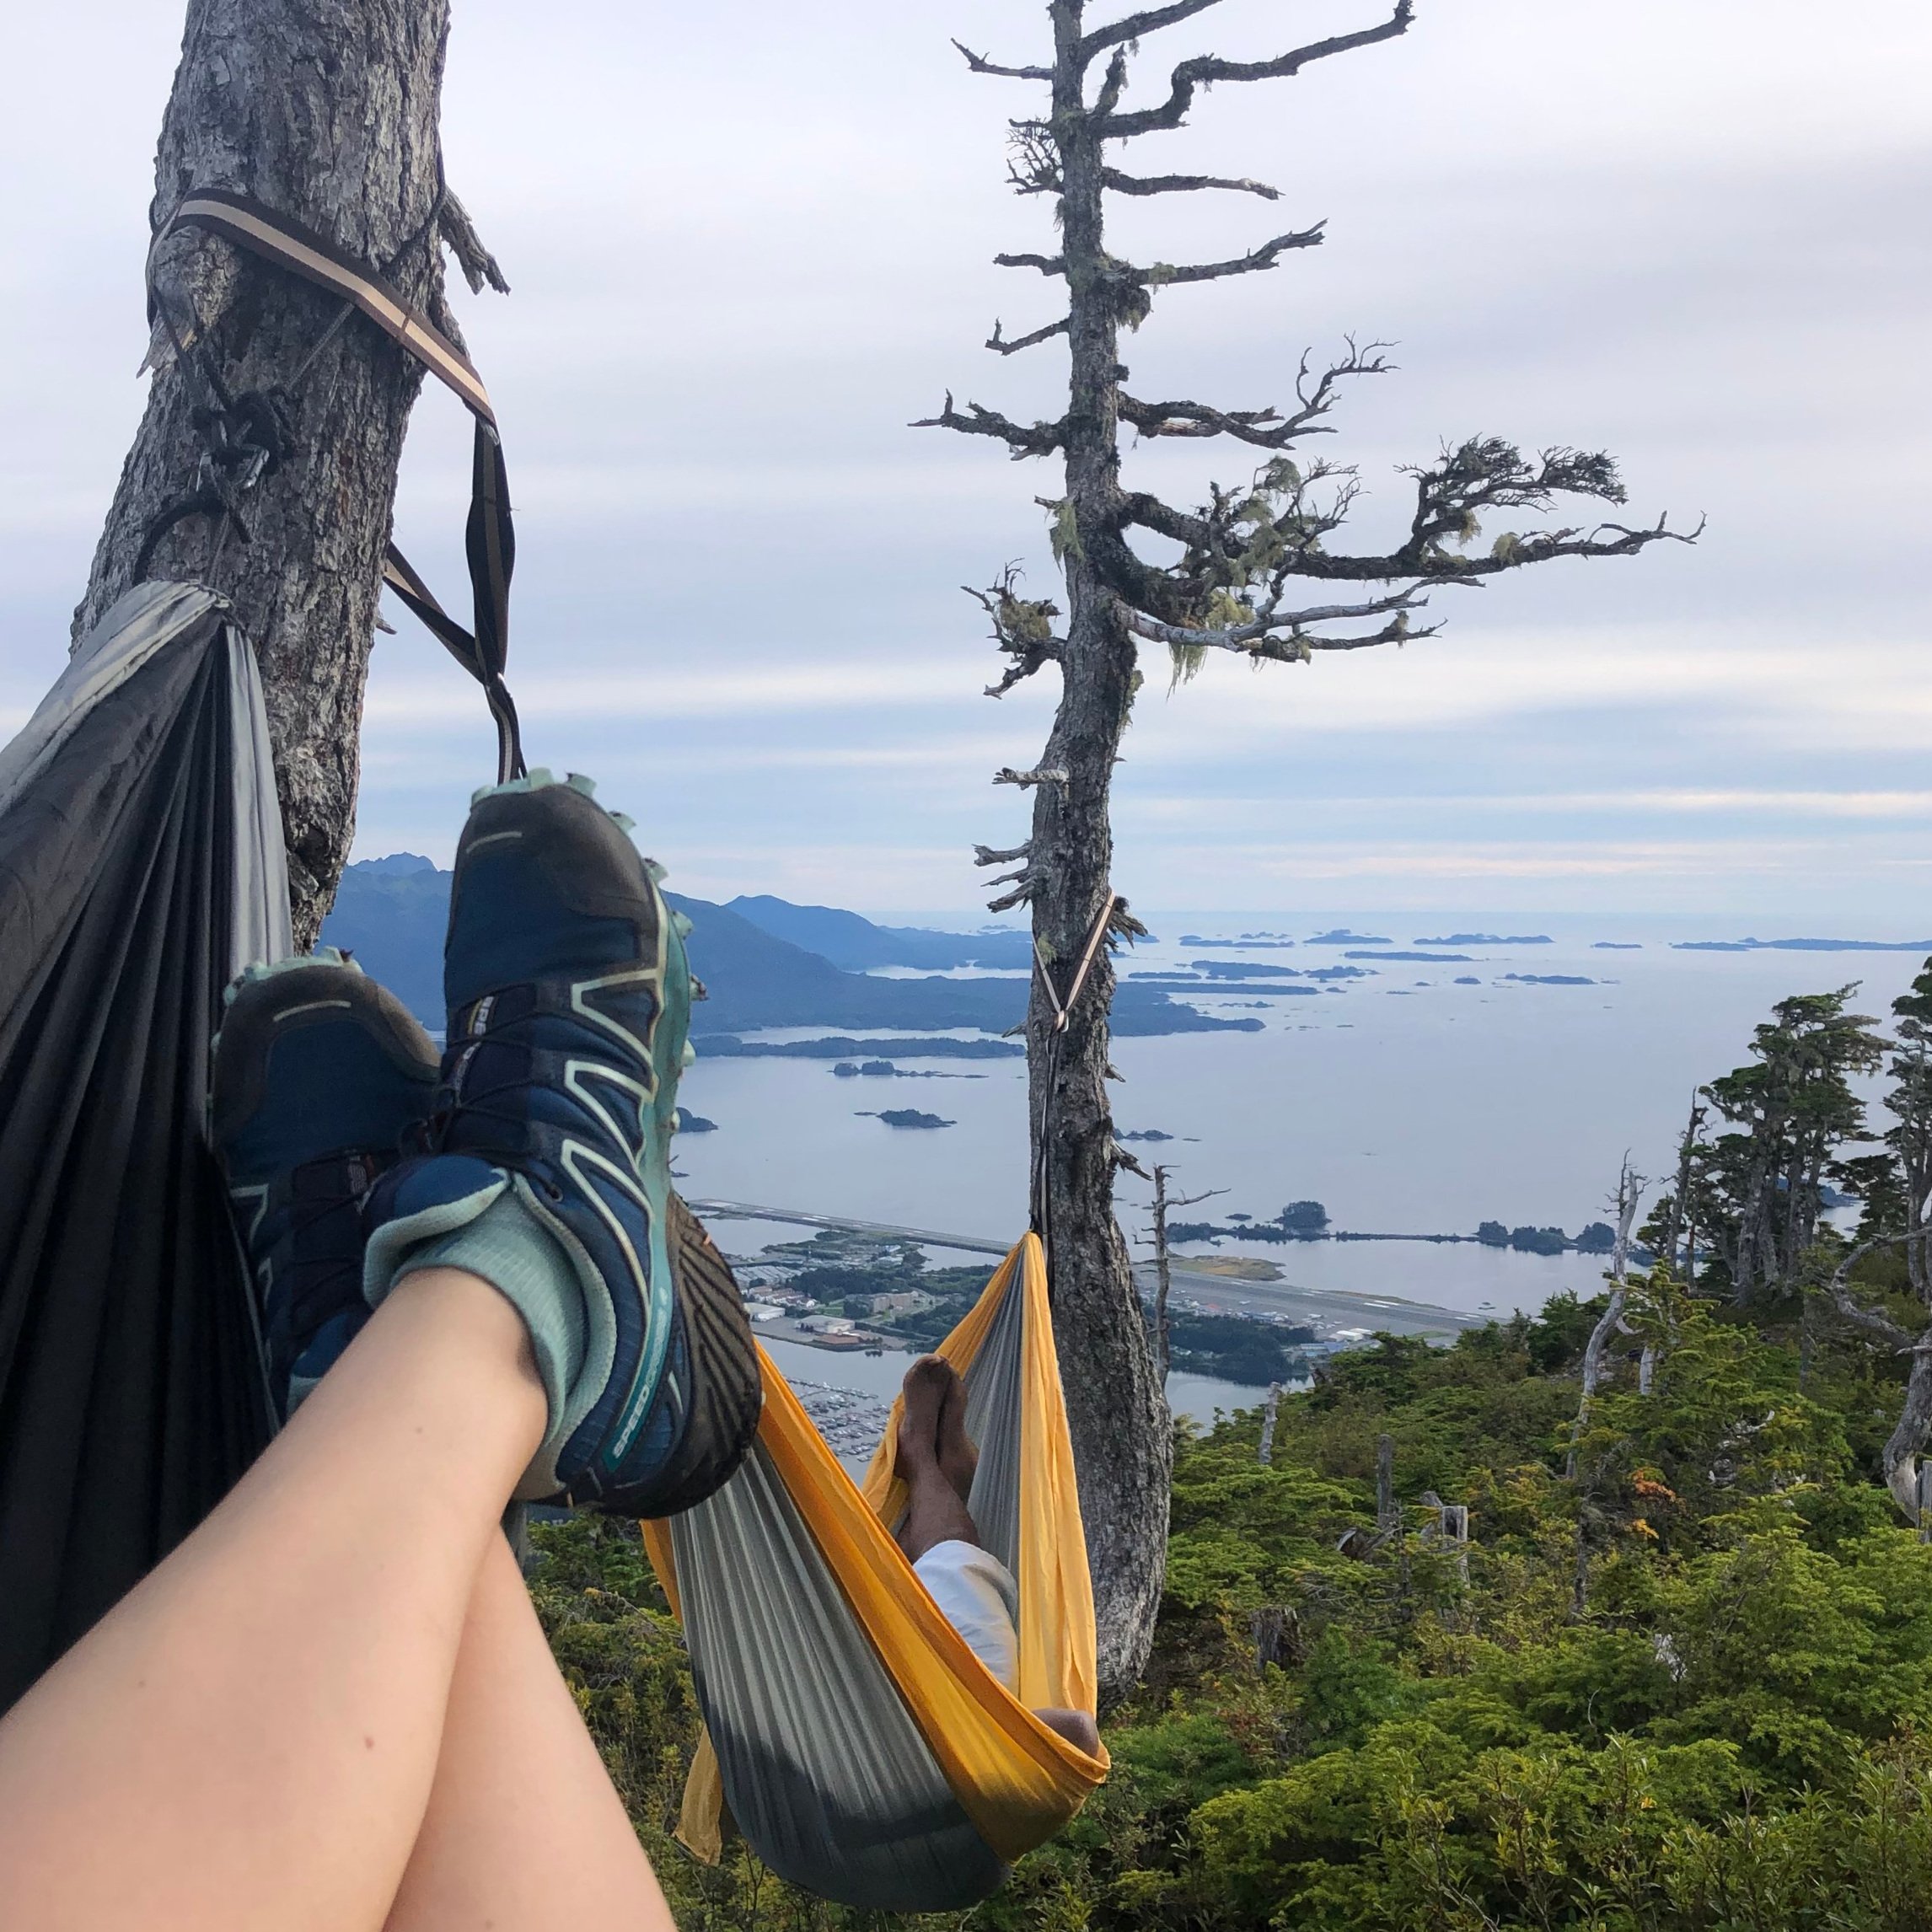 Photo taken by person laying in hammock set up in the alpine, legs and shoes showing with standing dead tree and ocean and islands beyond.